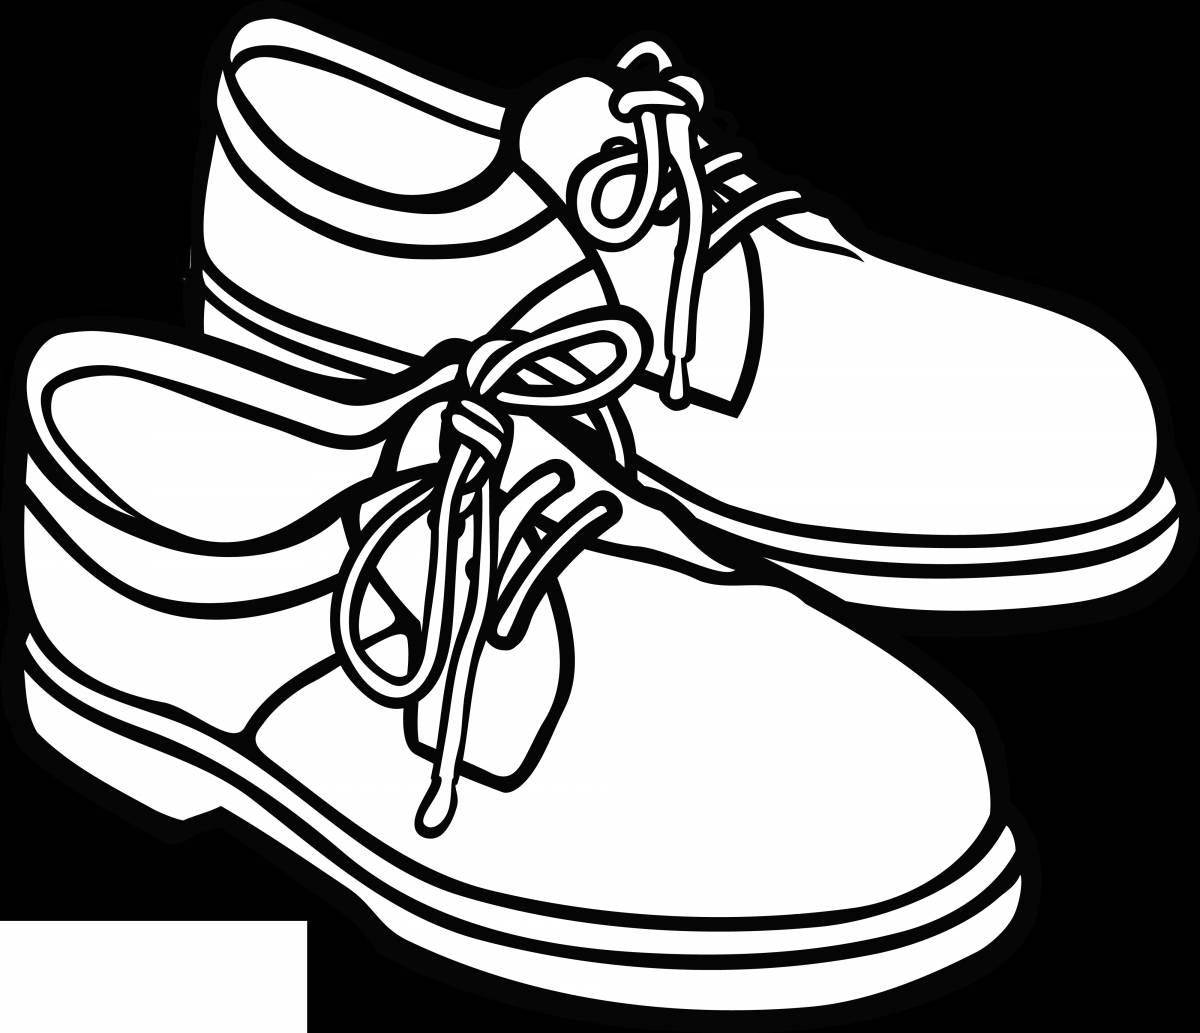 Colorful shoes coloring page for 4-5 year olds